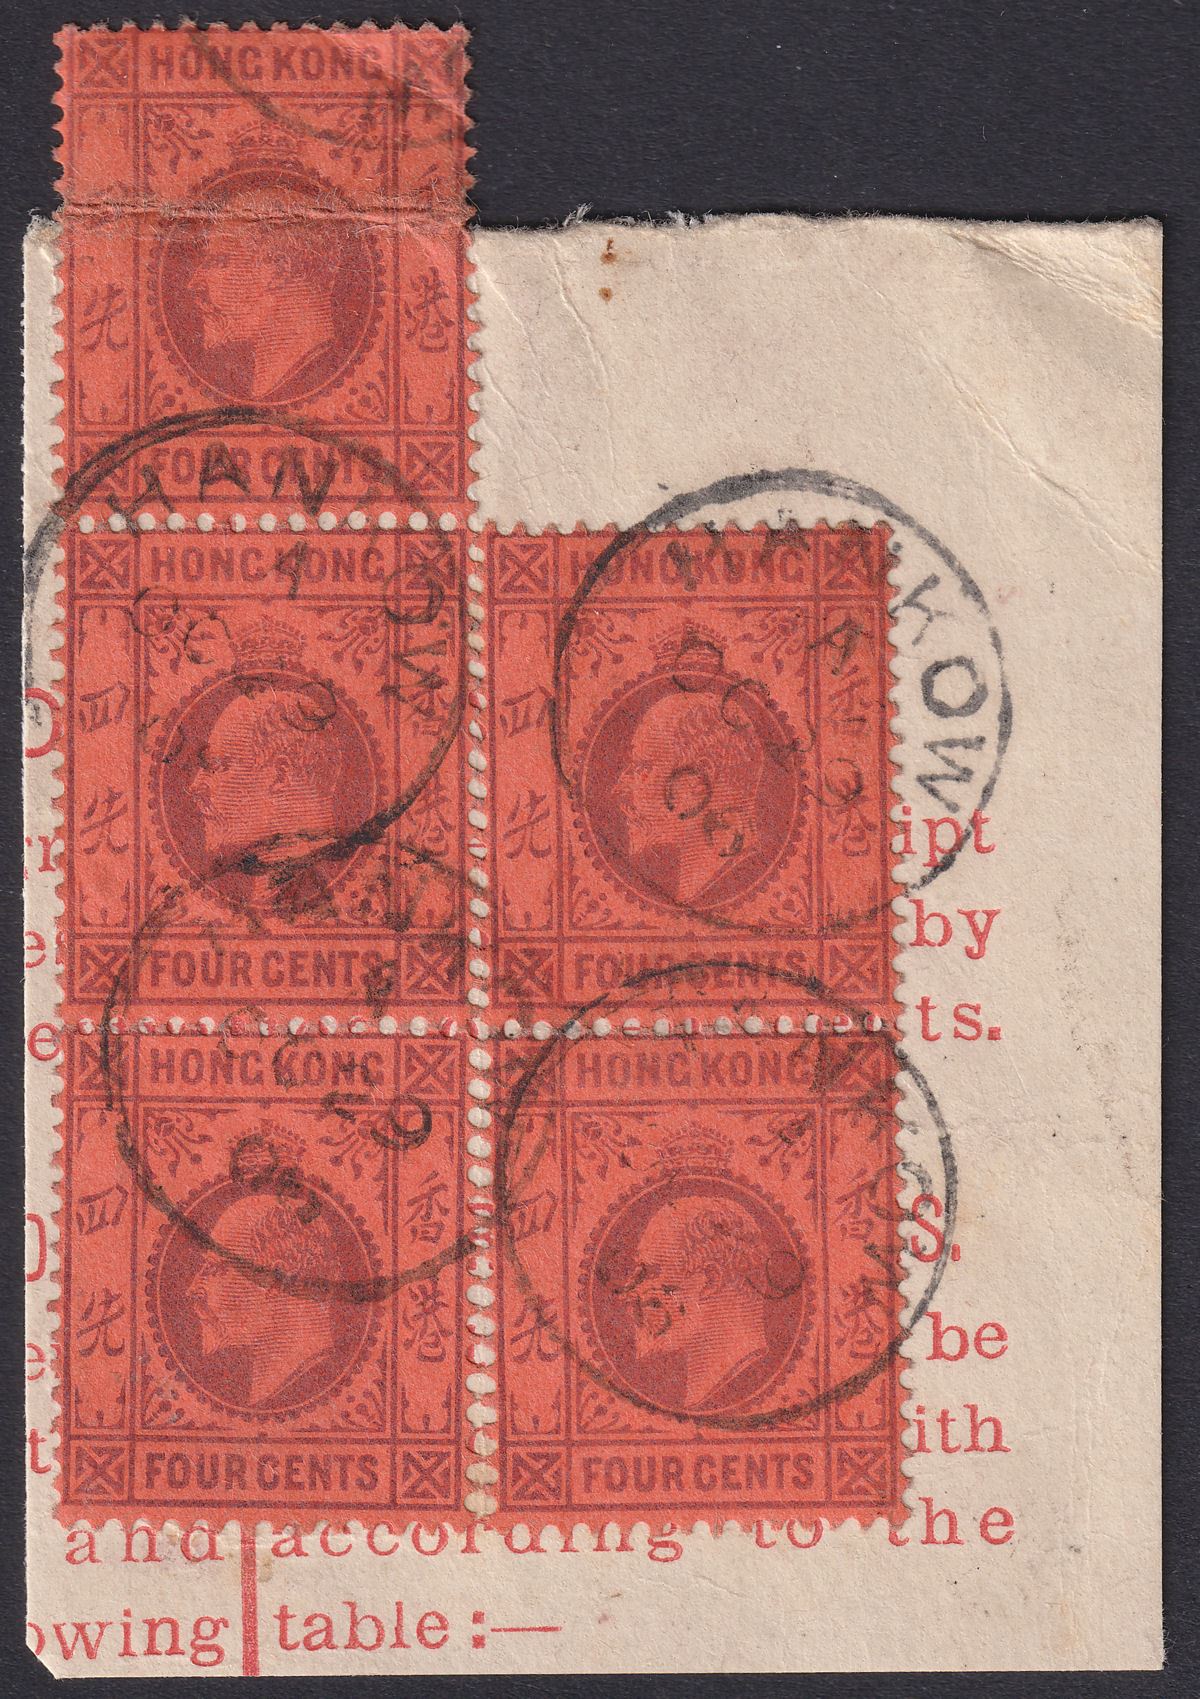 Hong Kong 1906 KEVII 4c x5 Used on Reg Post Stat Piece HANKOW Postmarks SG Z491